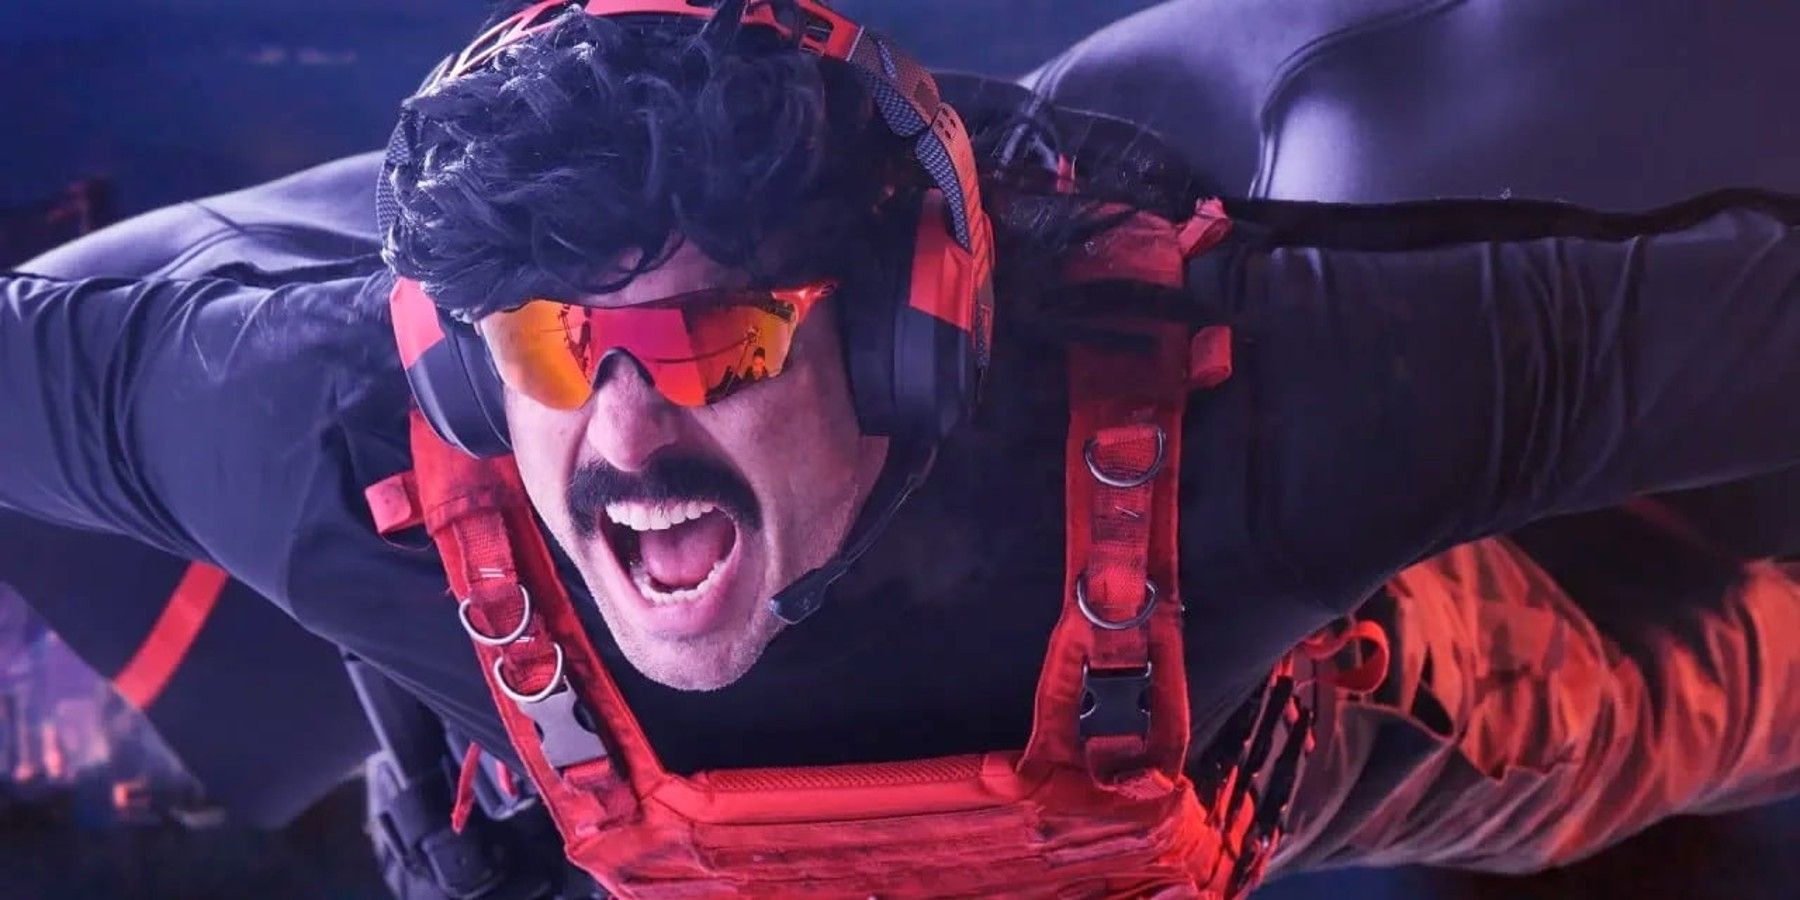 Dr Disrespect Rages at Apex Legends, Calls the Game ‘Terrible’ and Breaks His Mouse